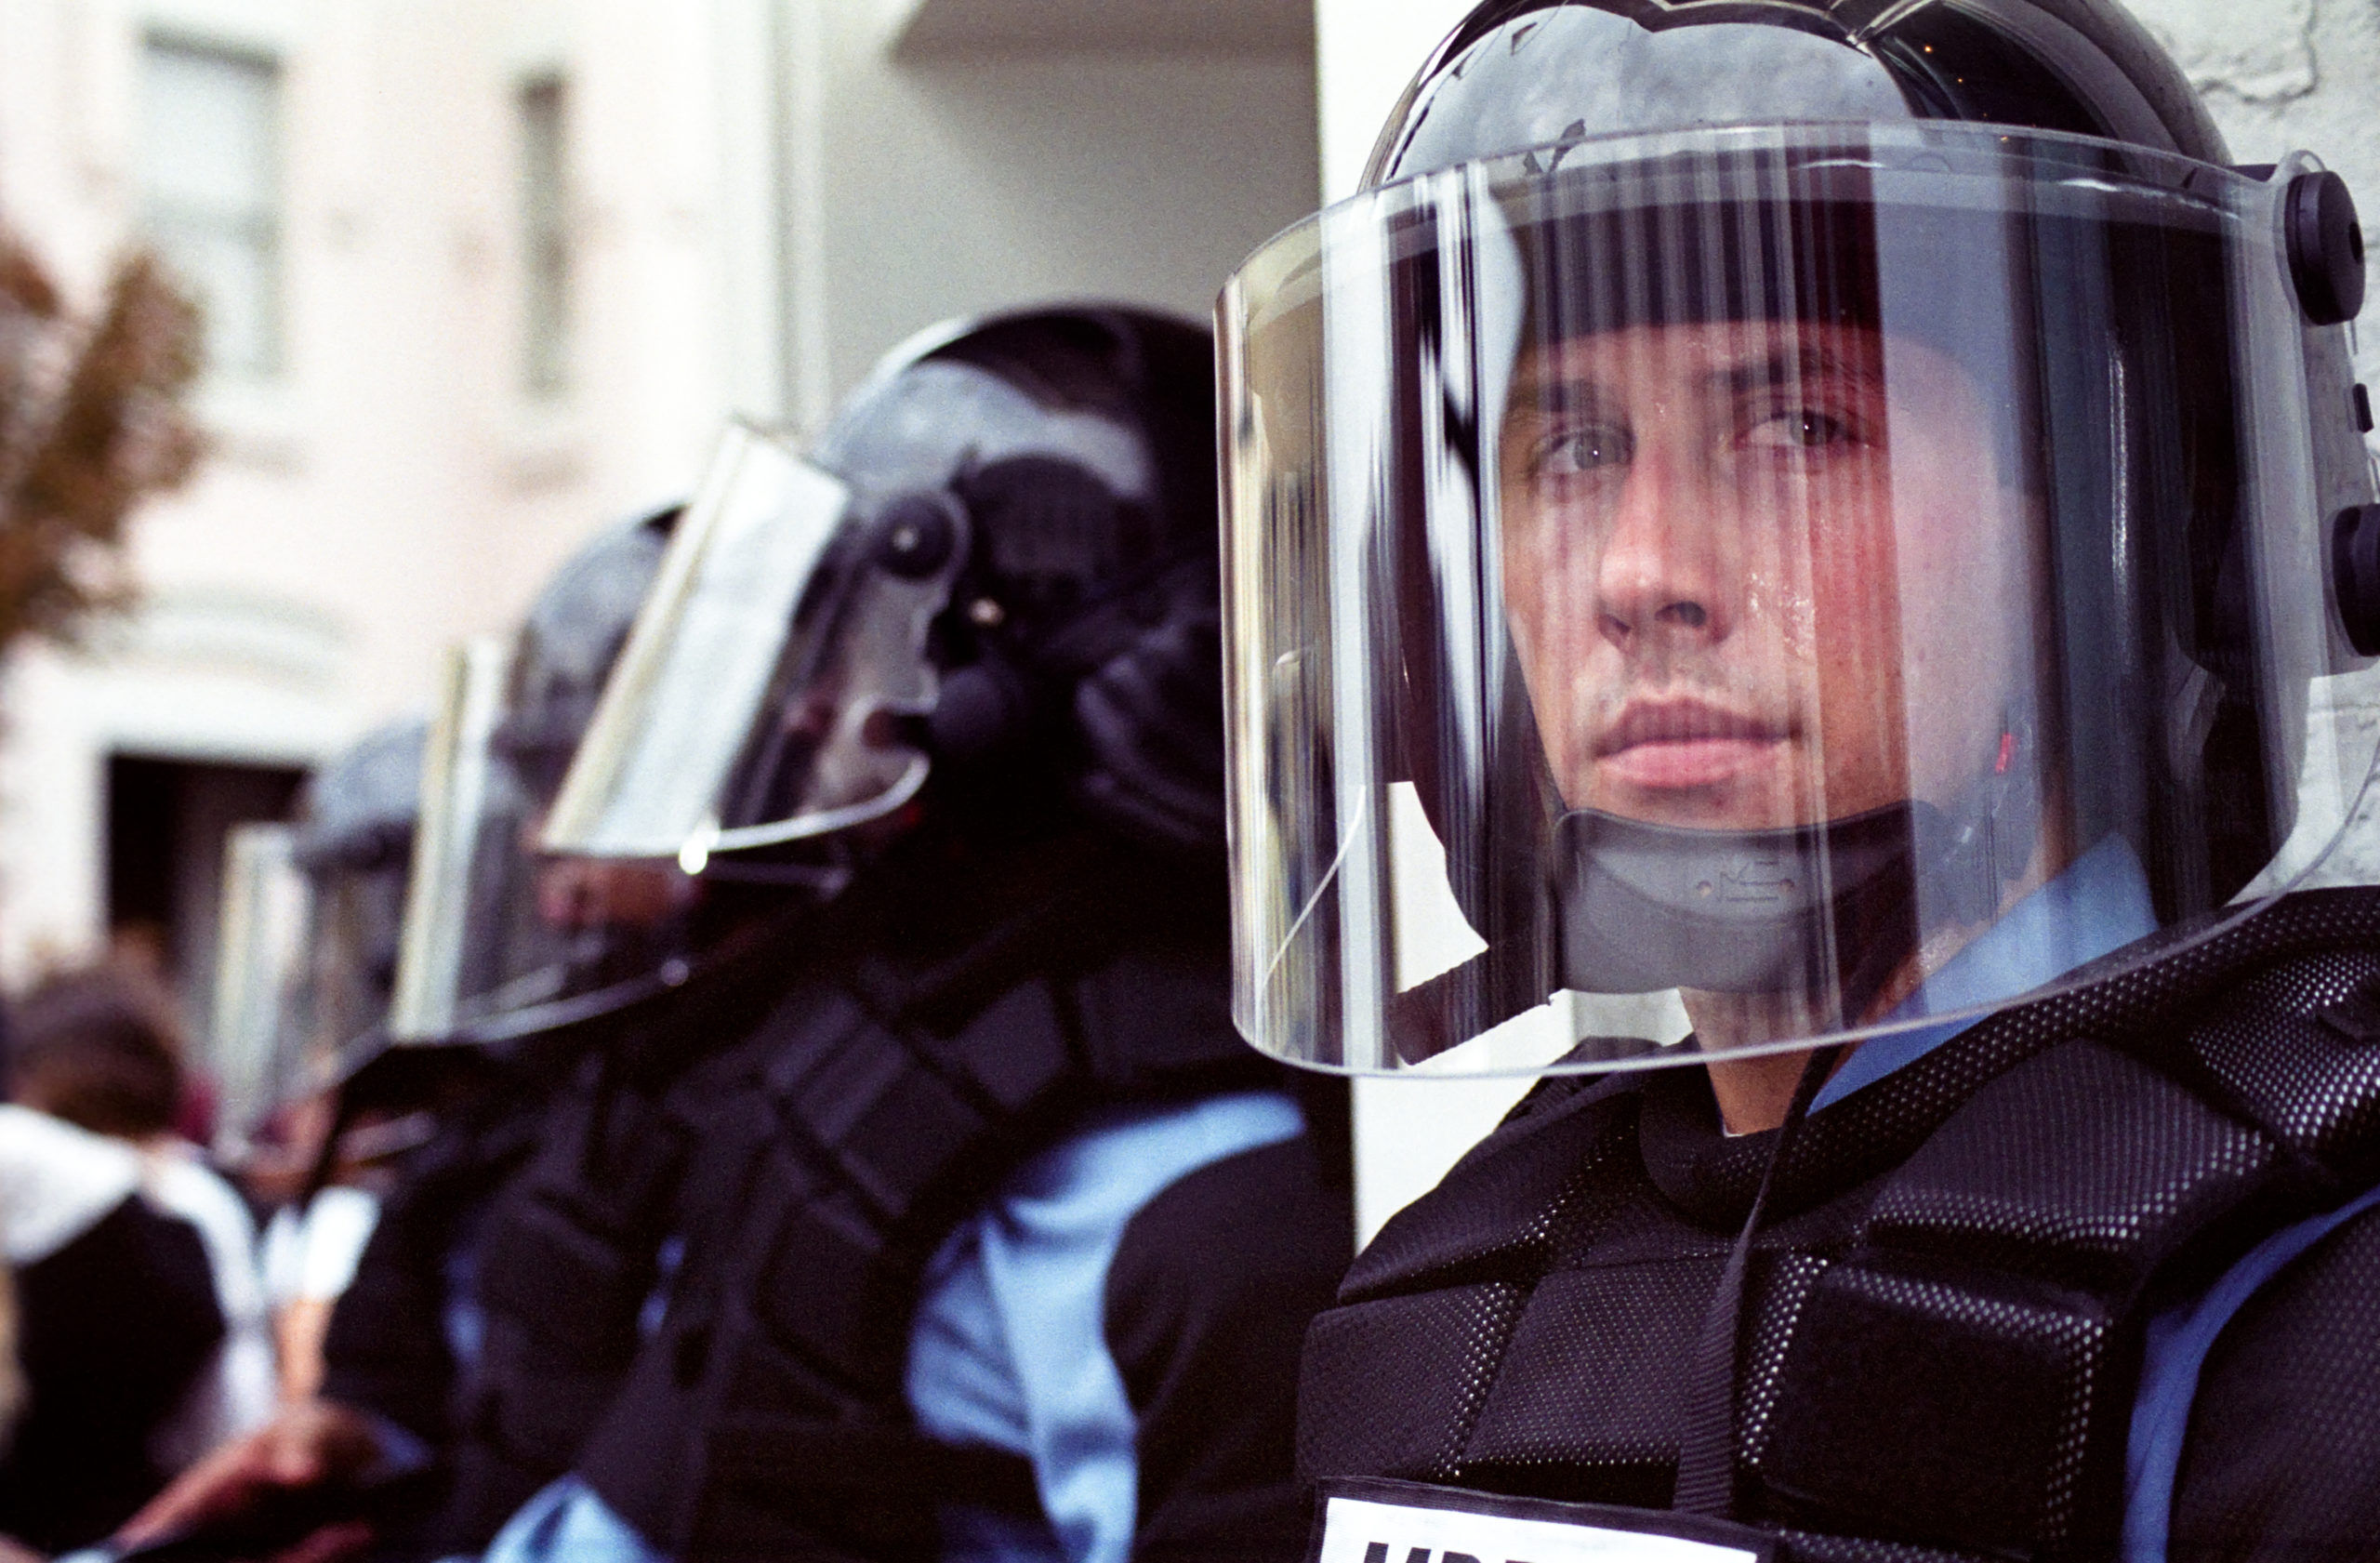 Police in full riot gear and batons guard Gap stores during anti-sweatshop protests on Sept. 27, 2002 in Washington, DC.